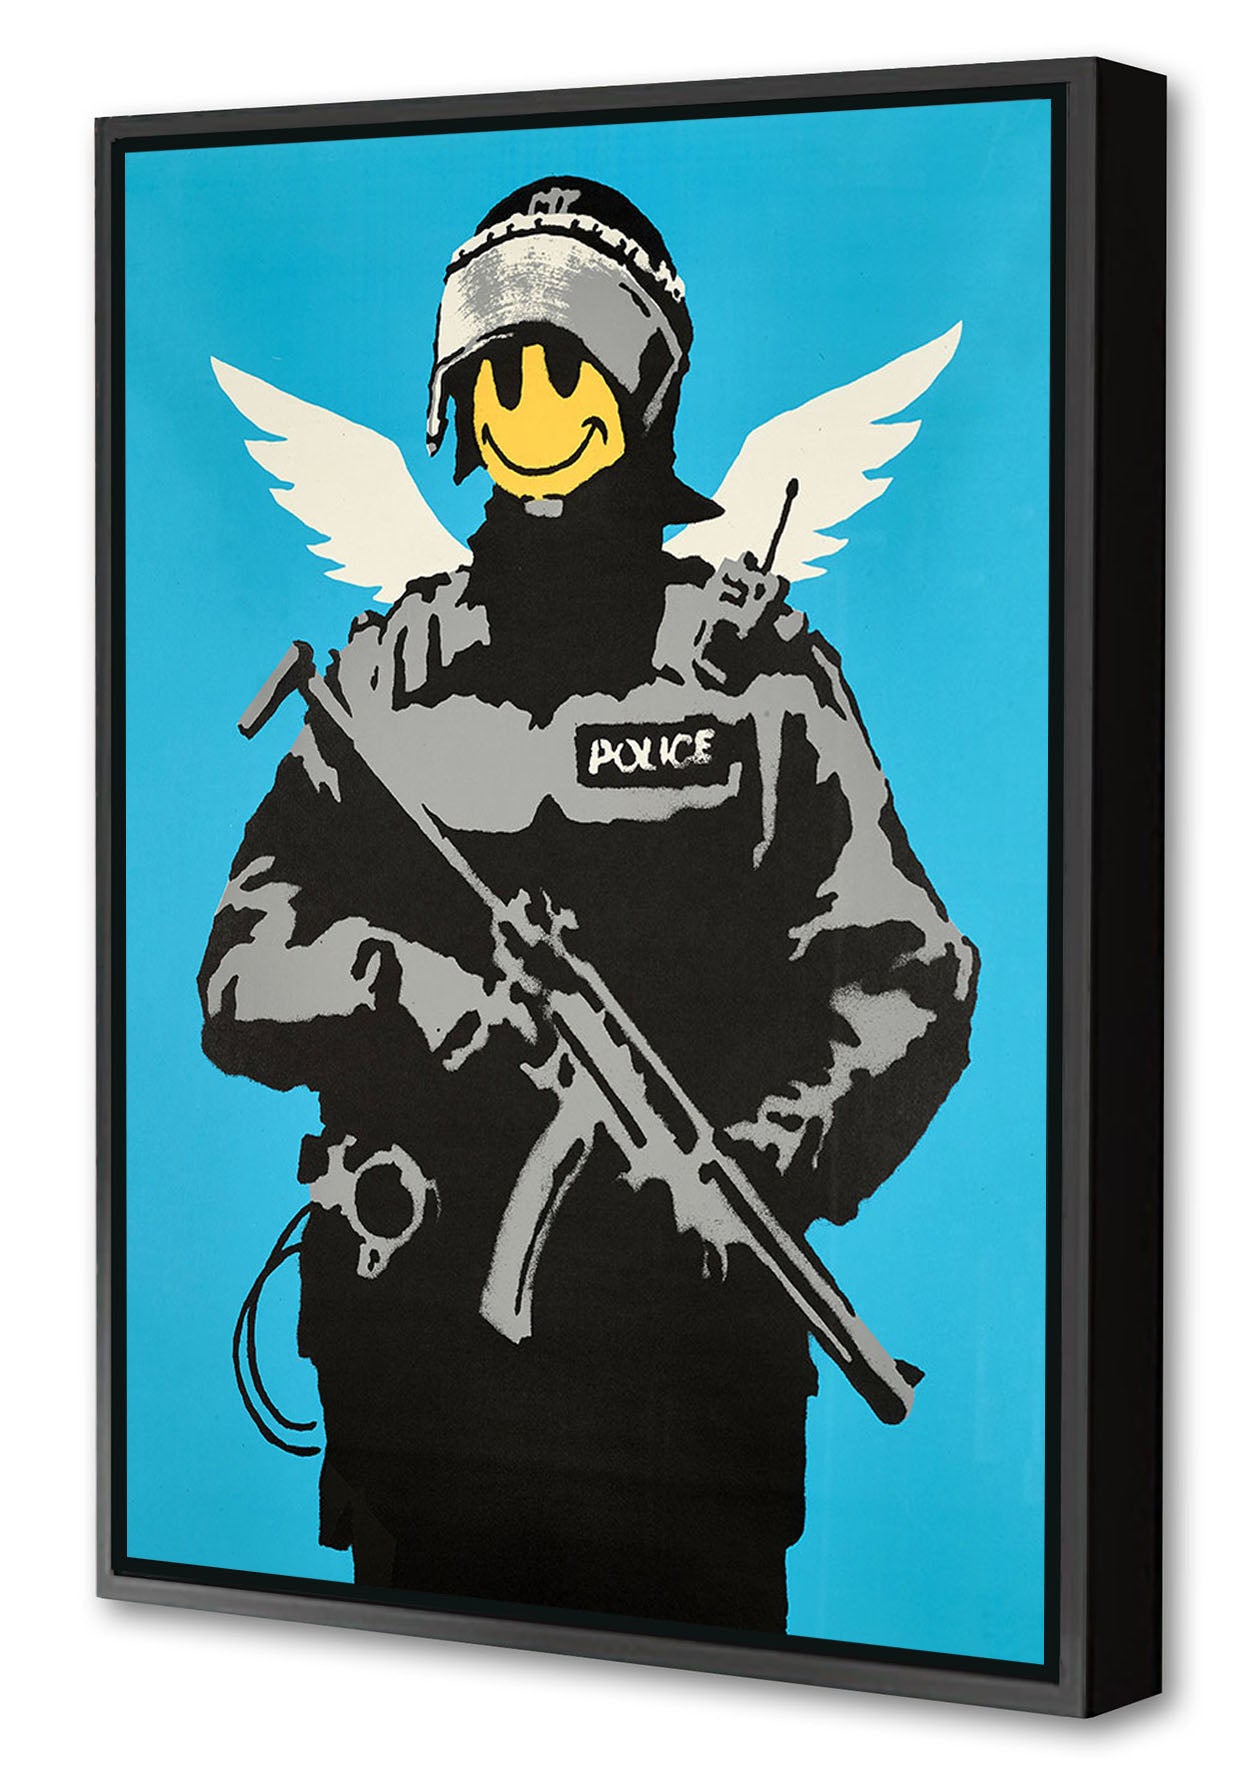 Flying Copper-banksy, print-Canvas Print with Box Frame-40 x 60 cm-BLUE SHAKER